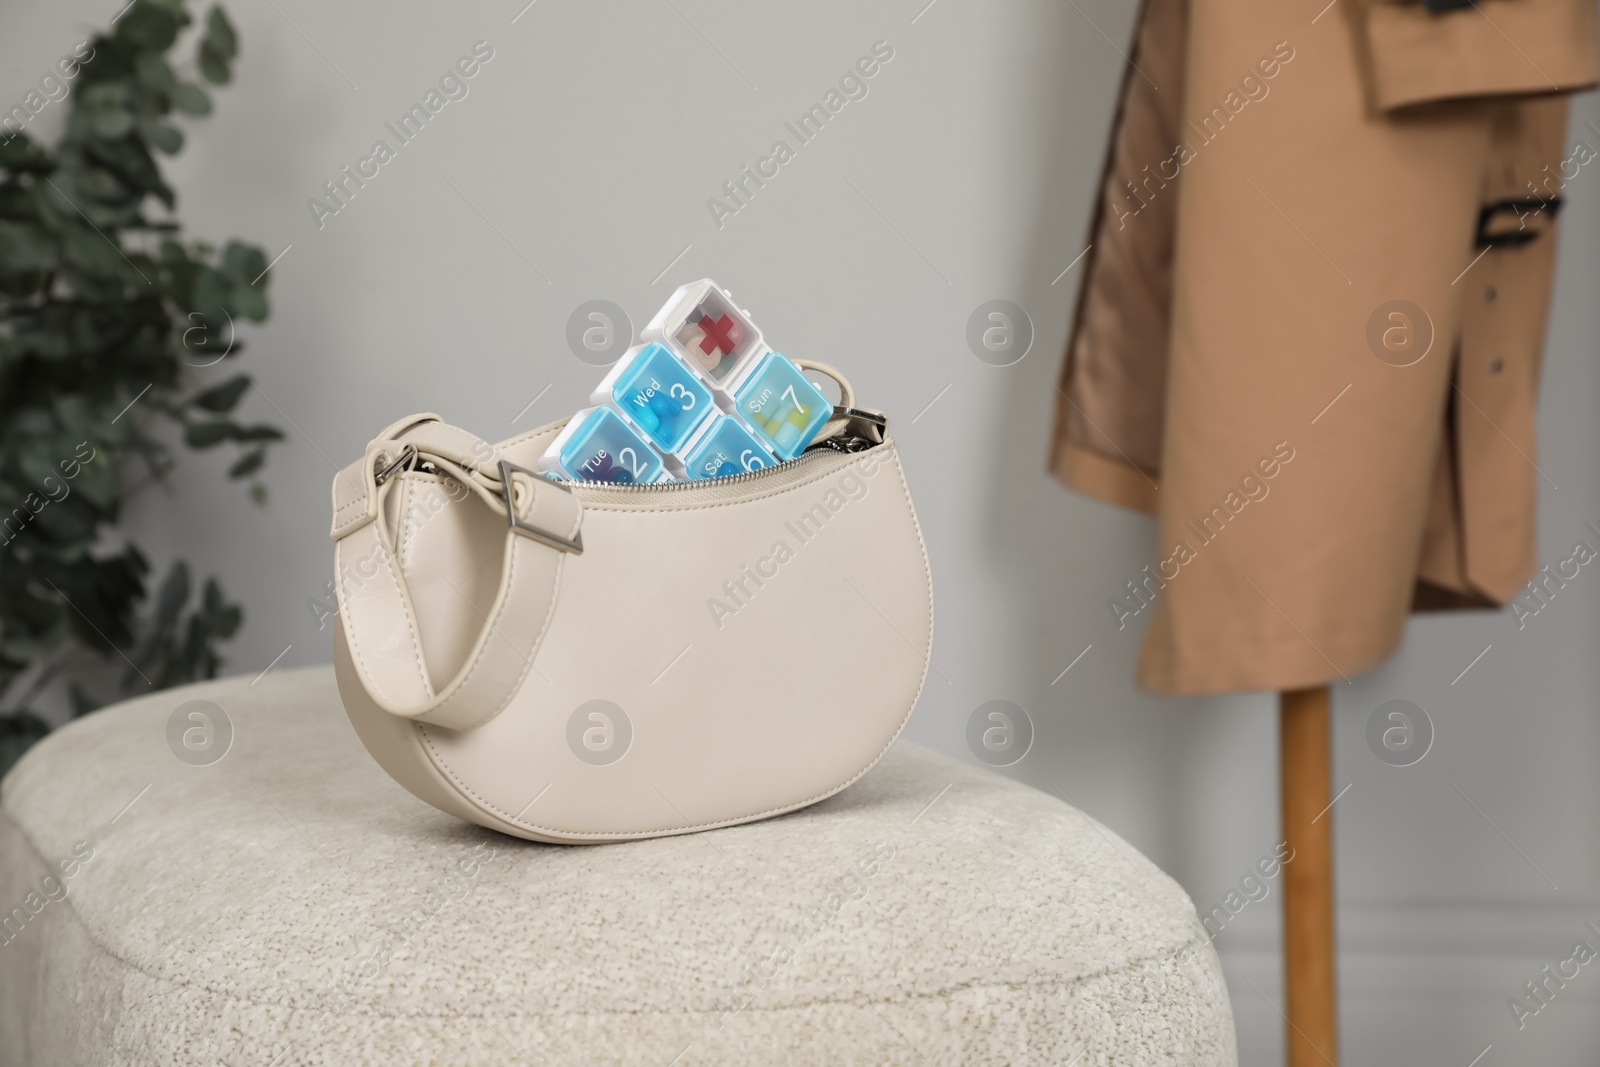 Photo of Stylish women's bag with plastic pill box on pouf indoors. Space for text